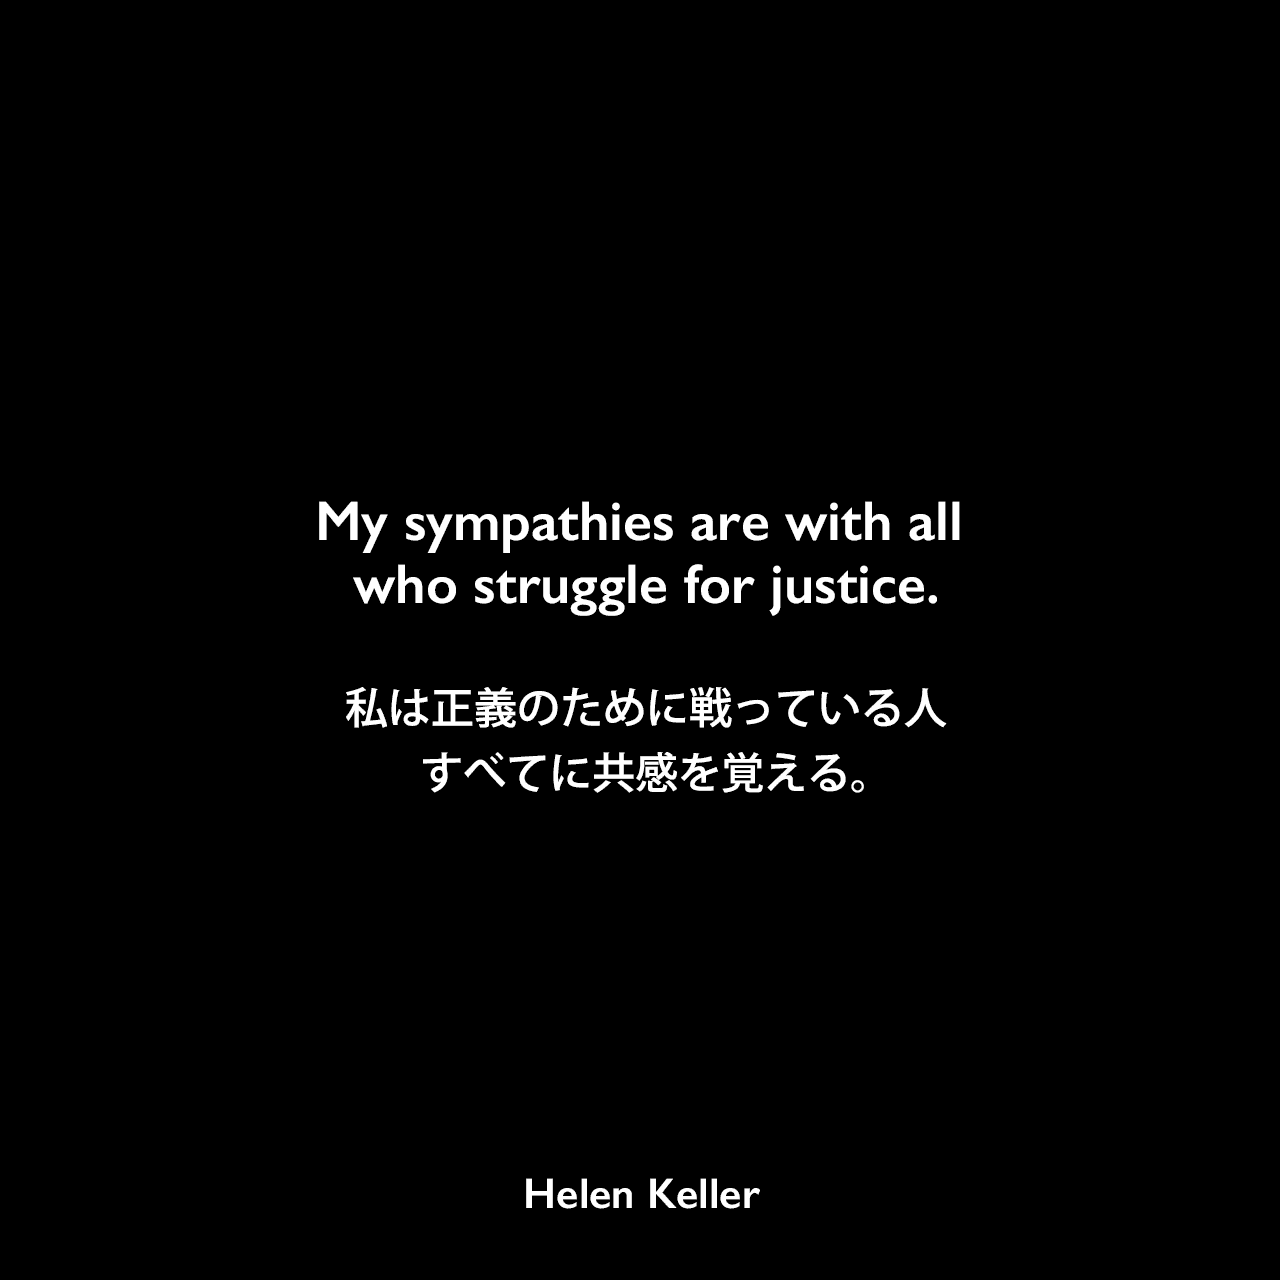 My sympathies are with all who struggle for justice.私は正義のために戦っている人すべてに共感を覚える。Helen Keller